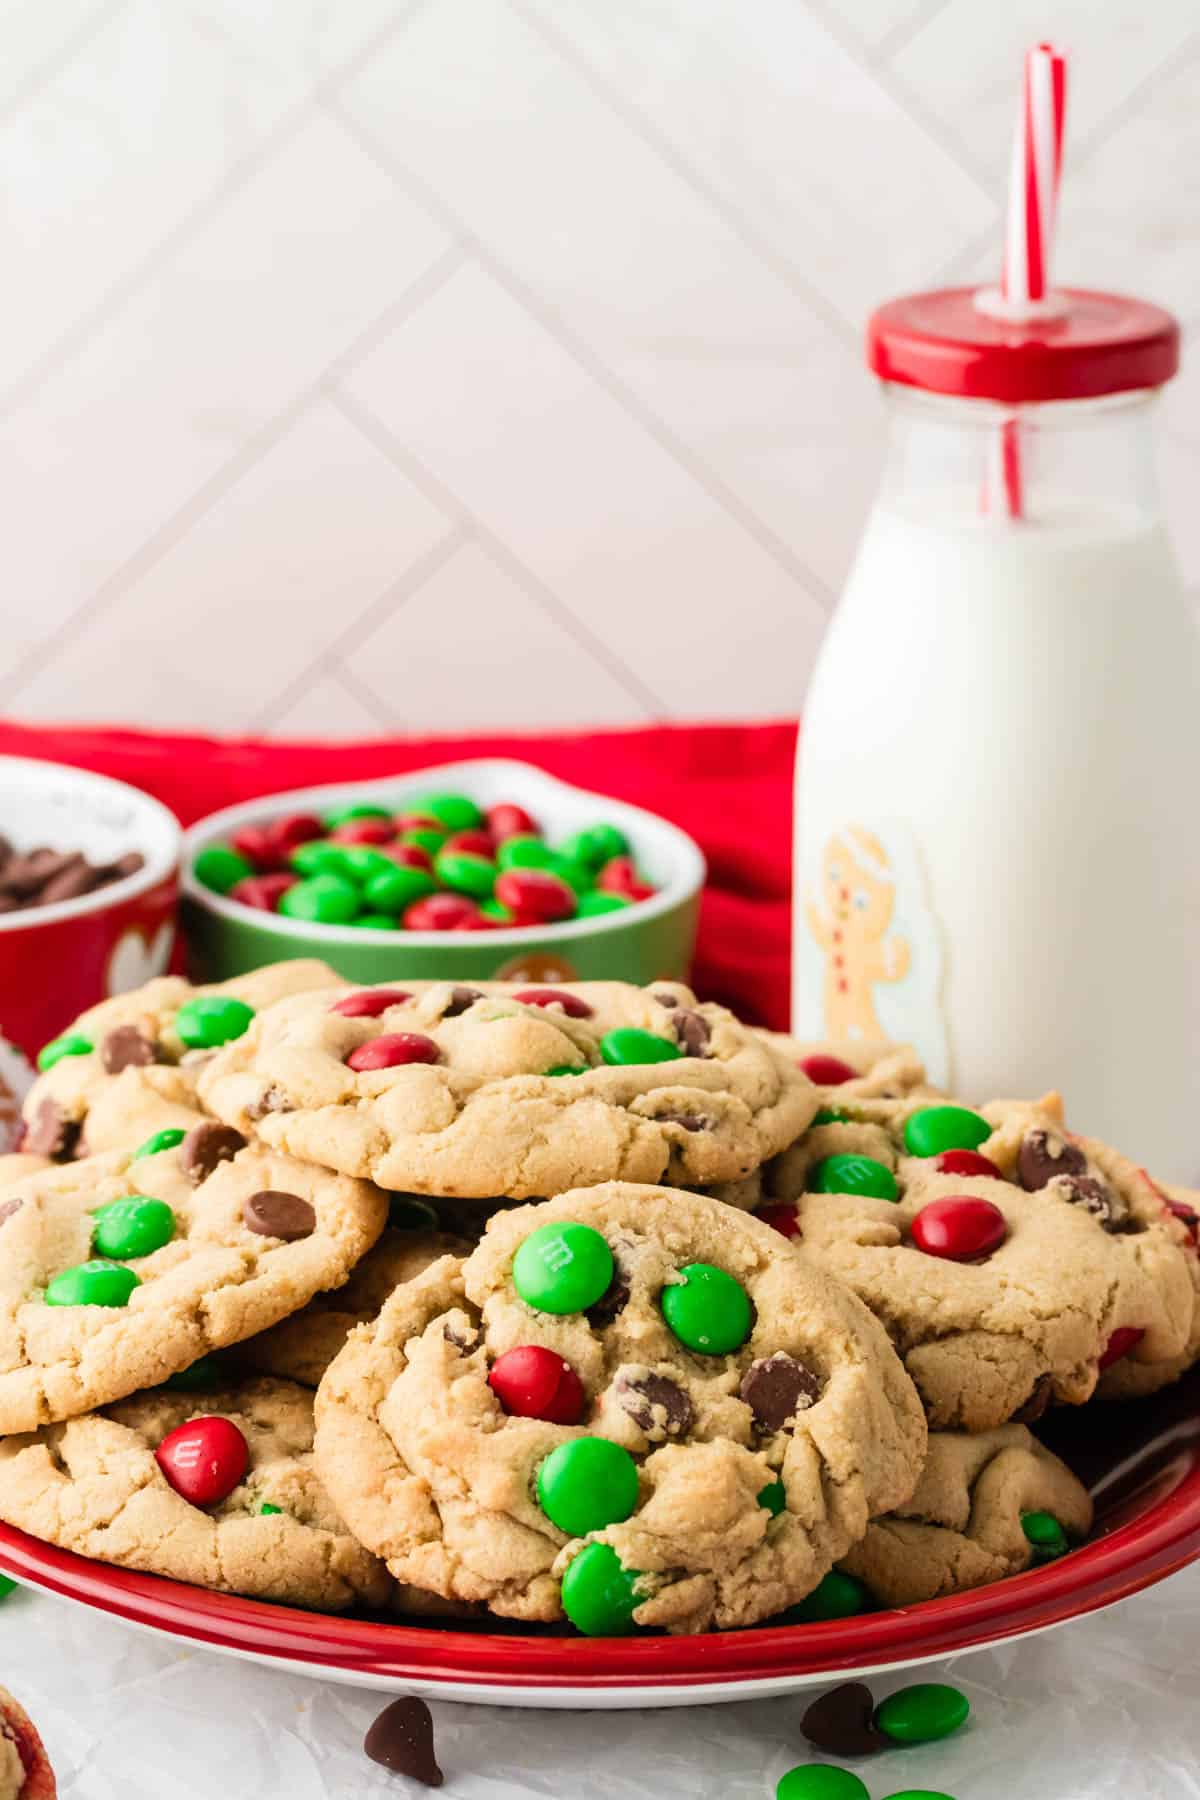 A plate of Christmas cookies and milk.